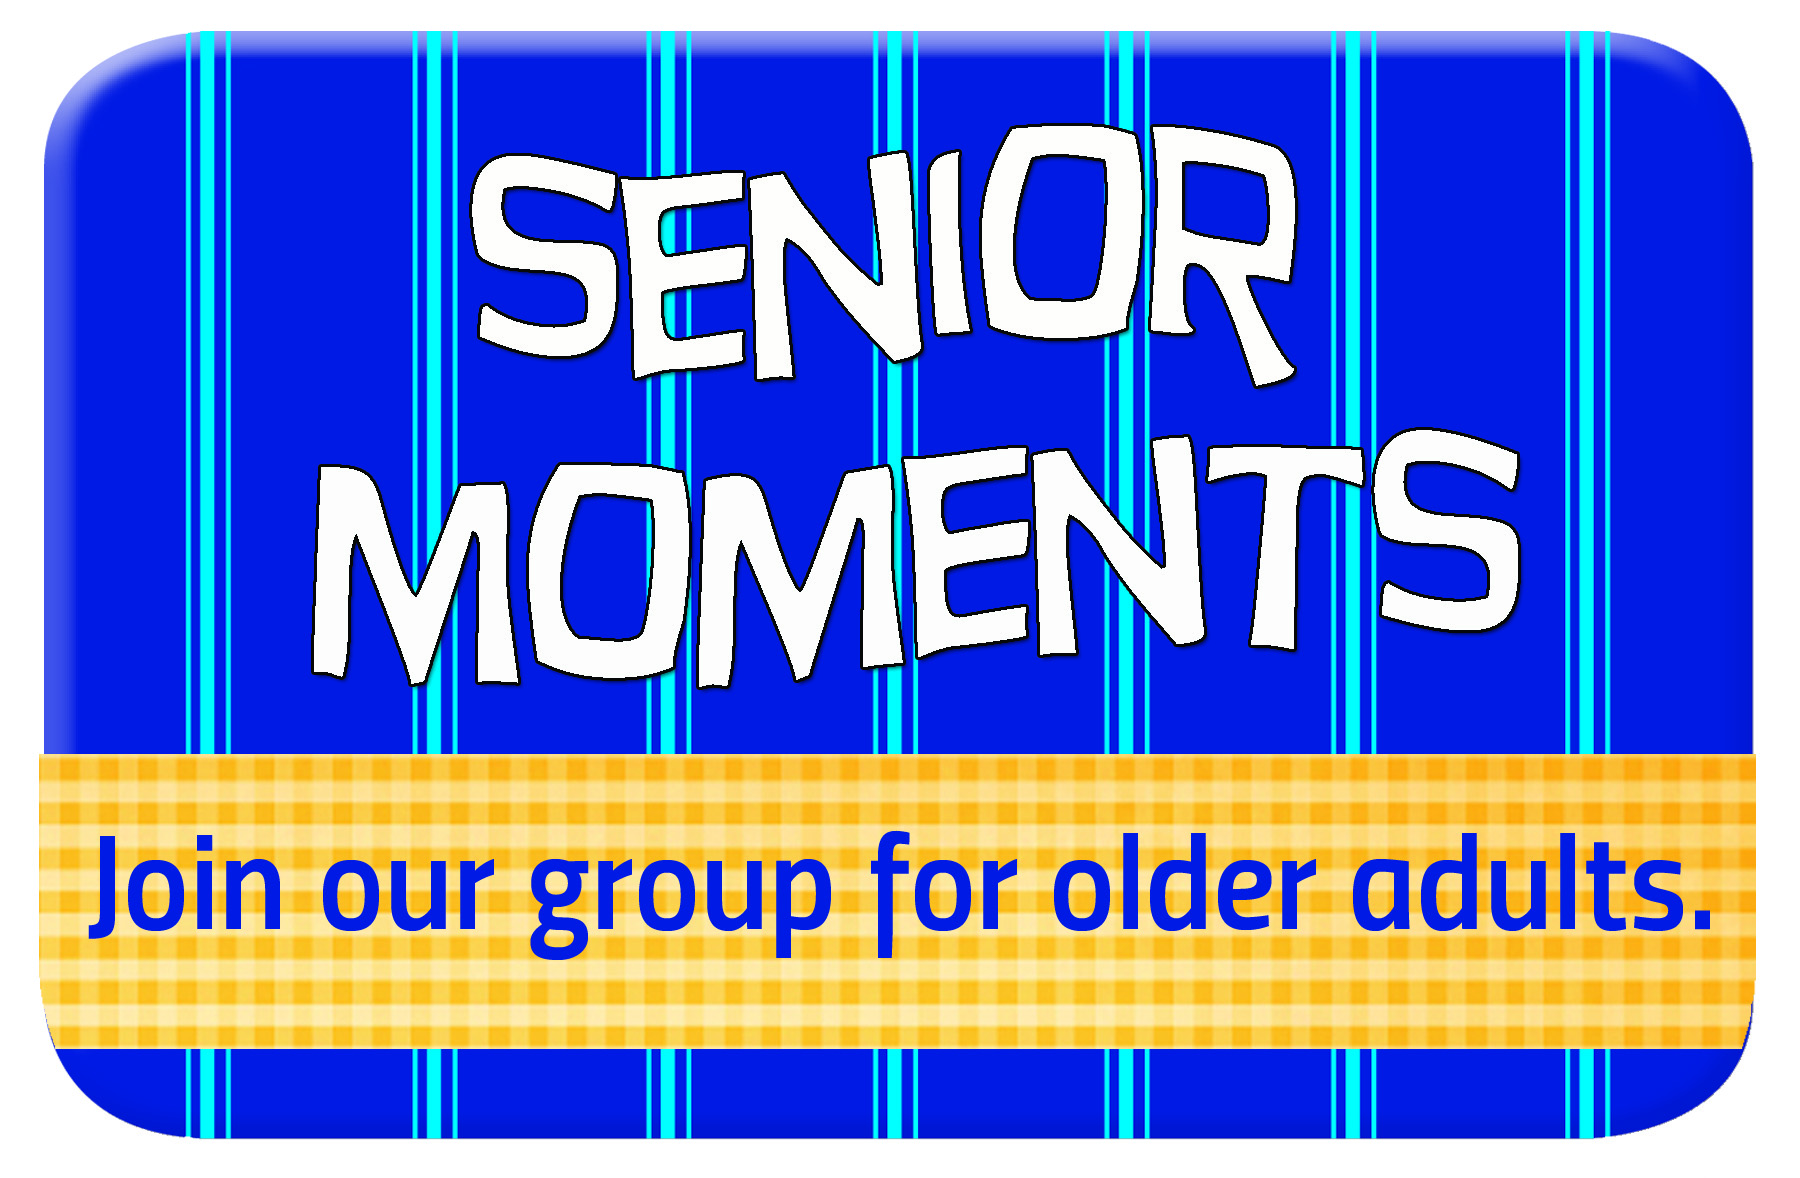 Senior moments graphic on blue background and text that says, "Join our group for older adults"